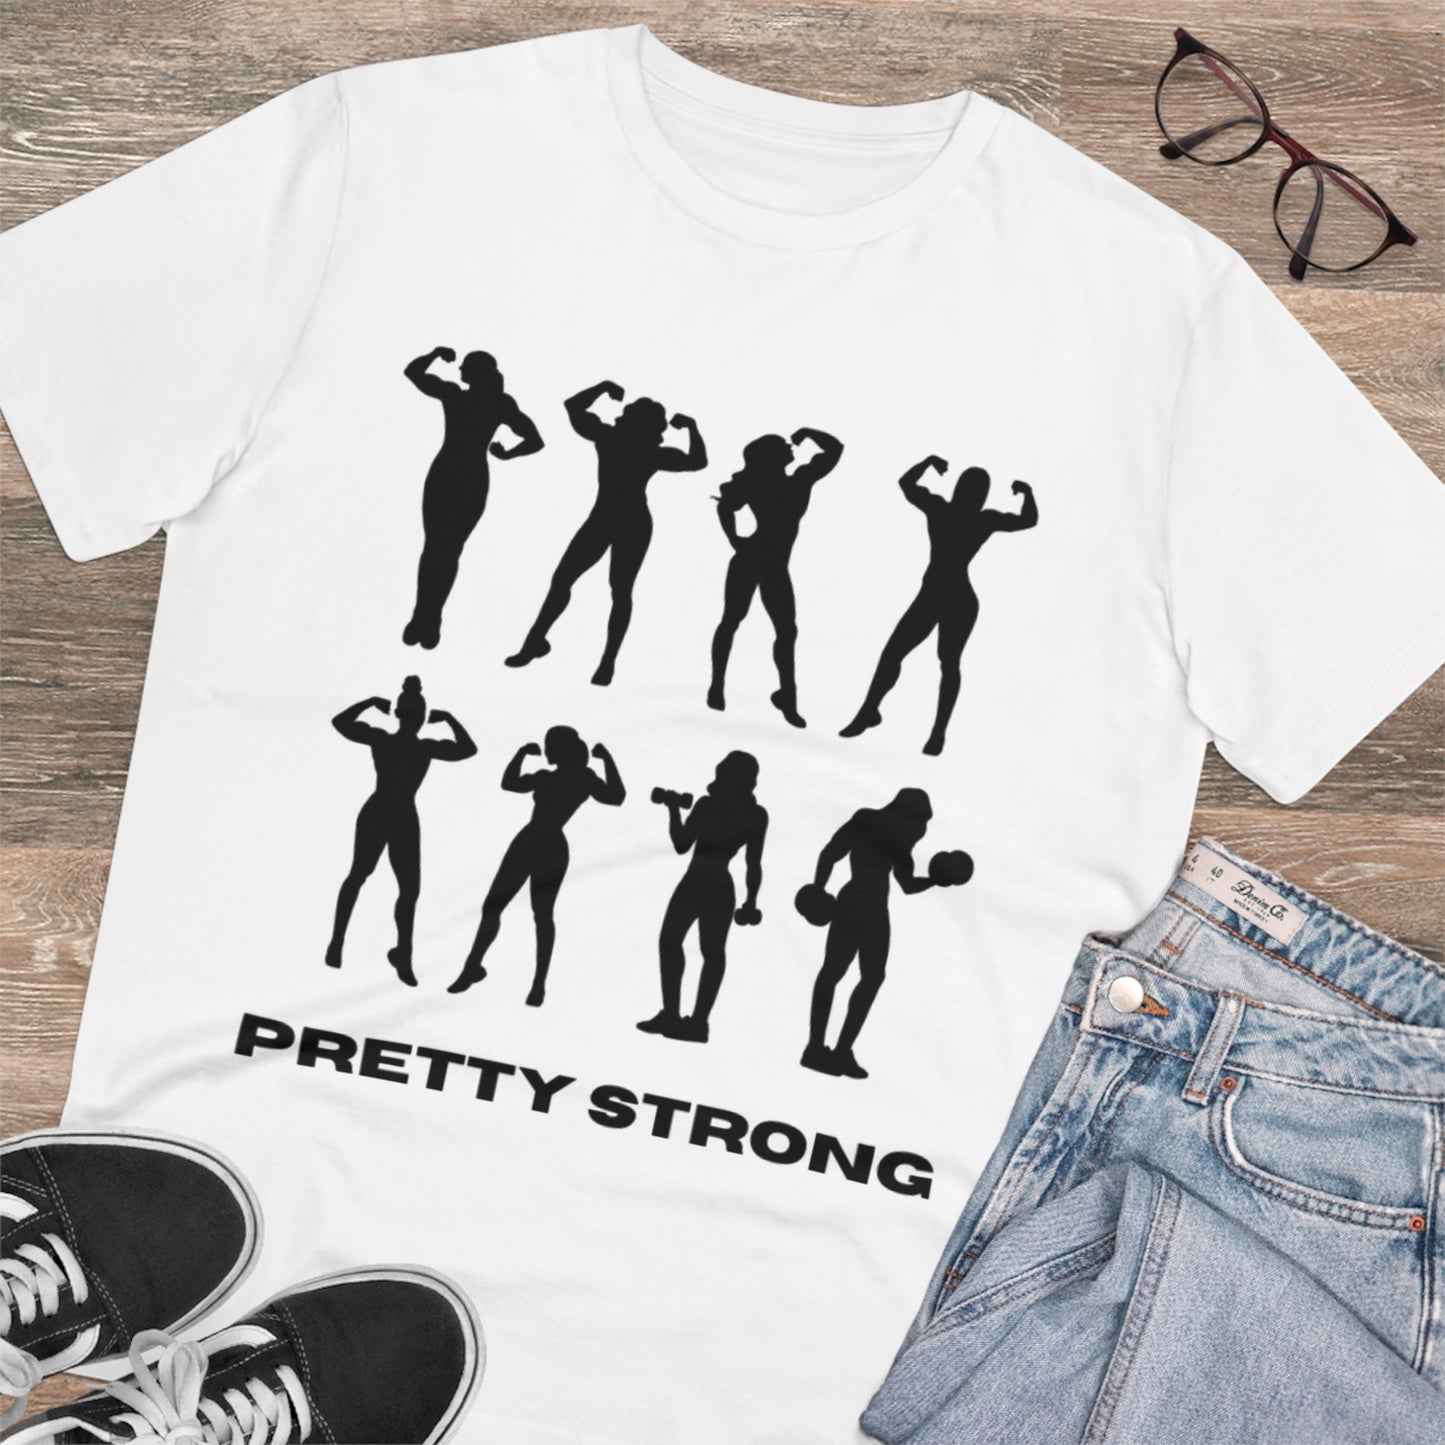 Empower Silhouette Tee "PRETTY STRONG" T-shirt - Unisex